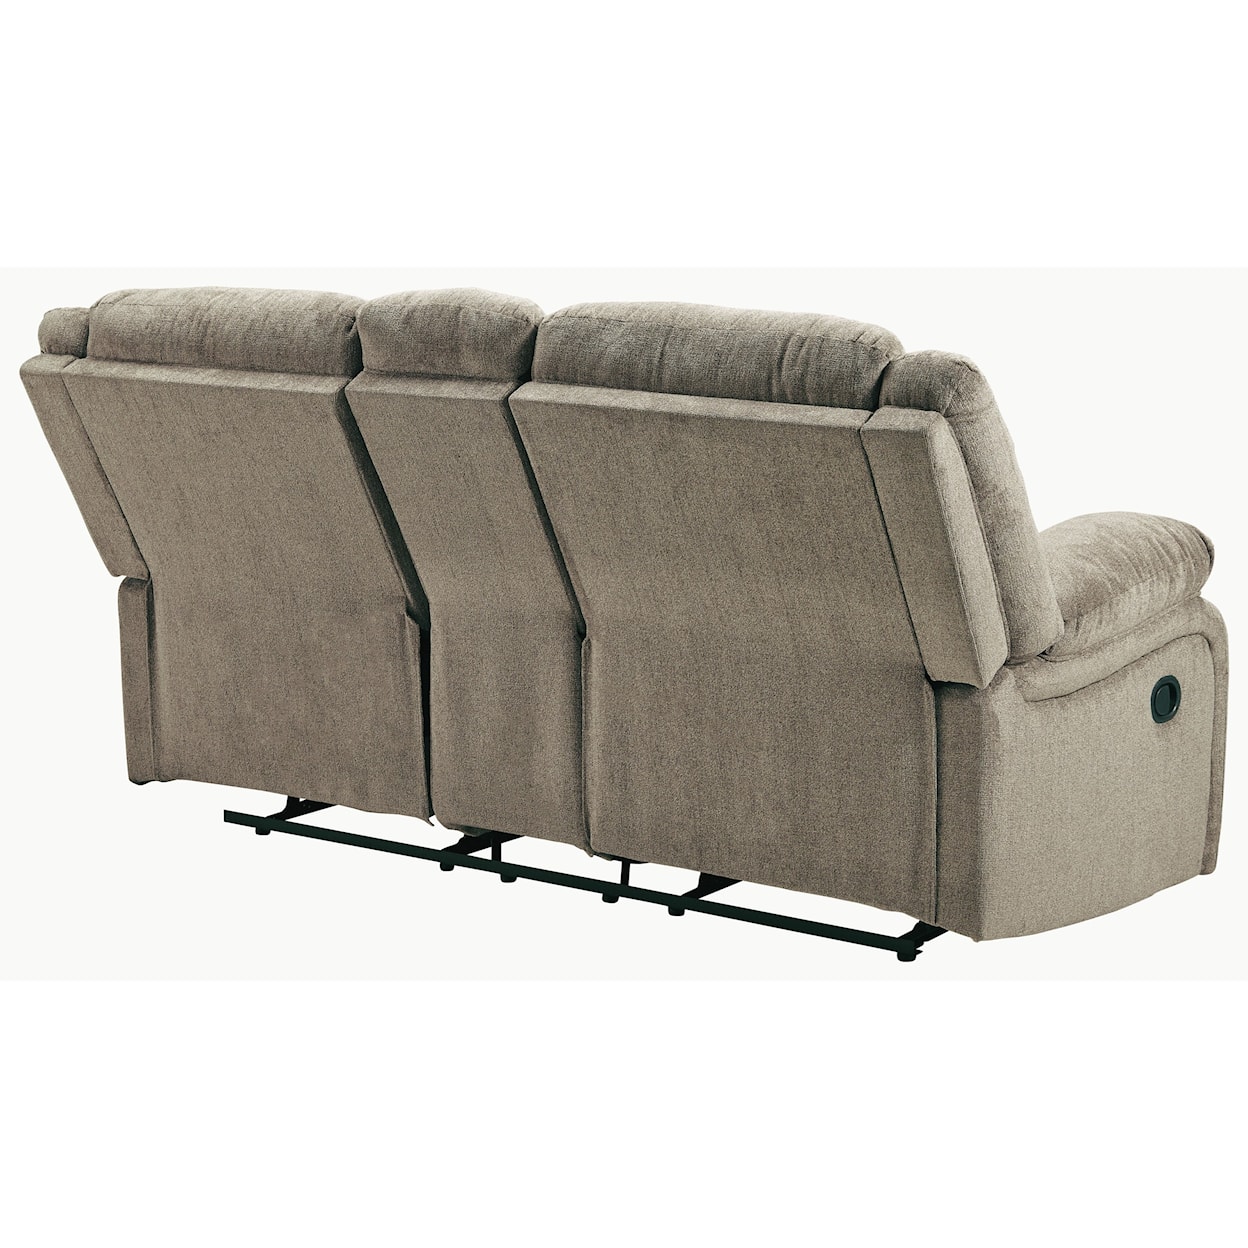 Signature Design by Ashley Draycoll Double Reclining Power Loveseat w/ Console